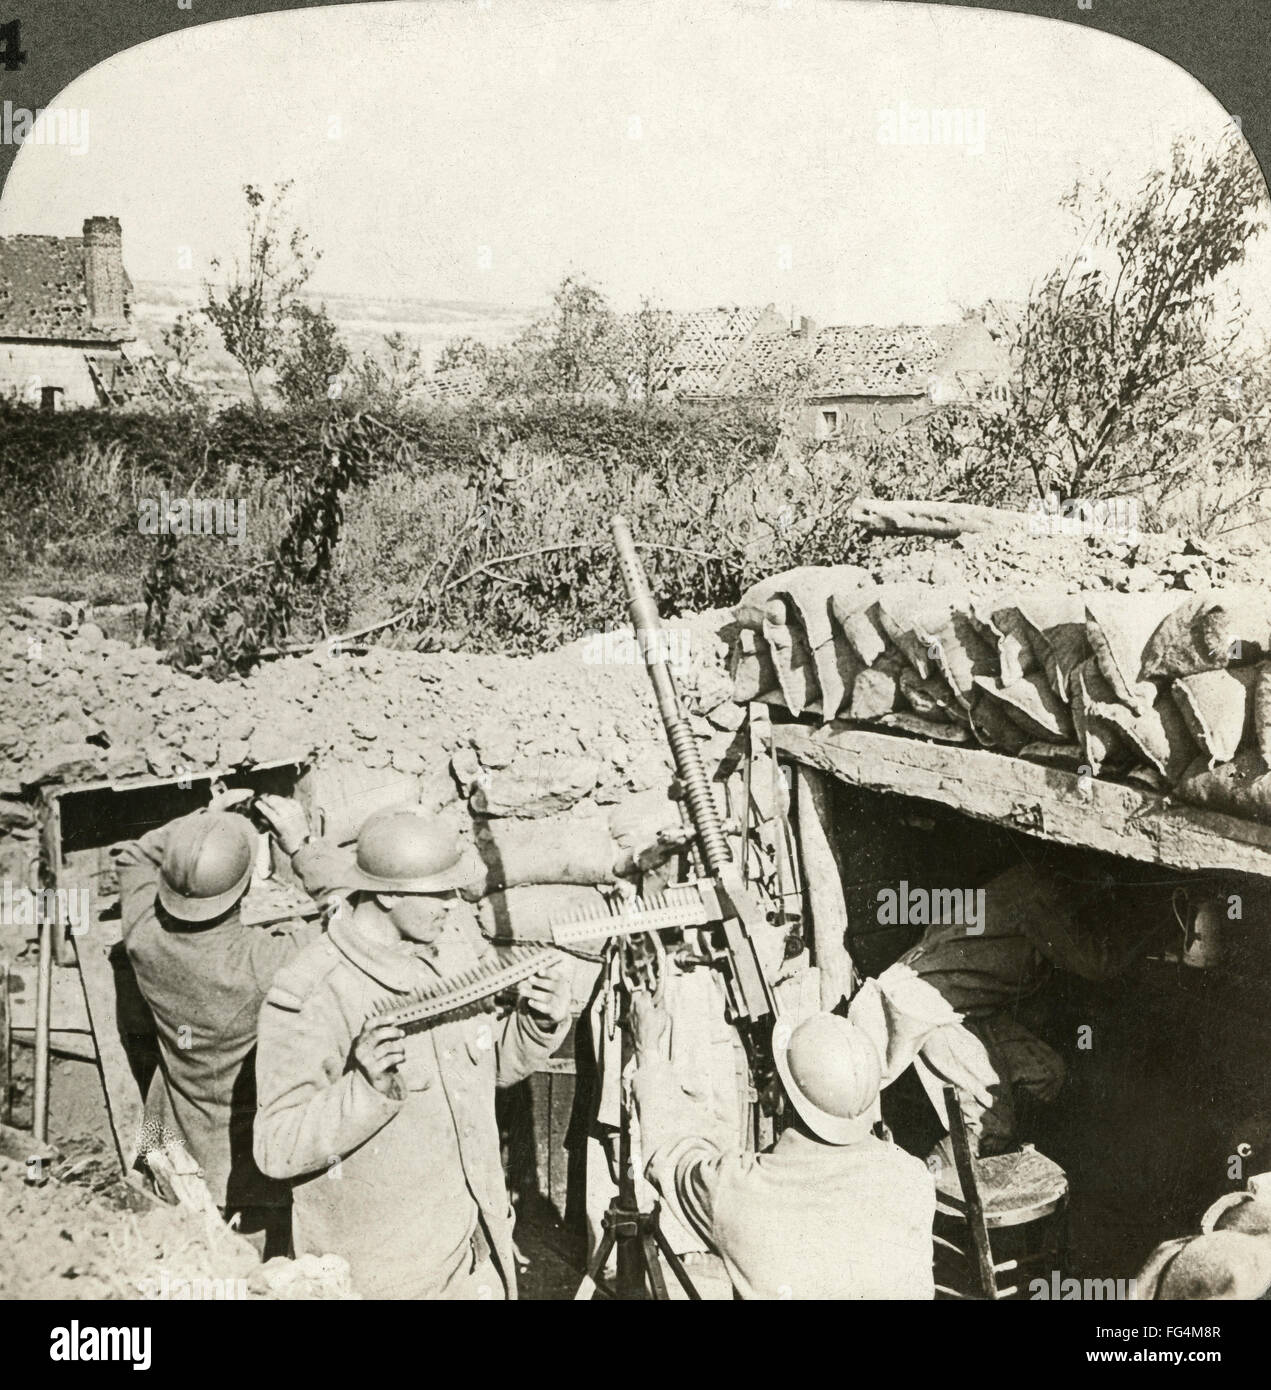 WORLD WAR I: ANTI-AIRCRAFT. /nFrench soldiers manning an anti-aircraft machine gun in a trench in rural France during World War I. Stereograph, c1914-1918. Stock Photo